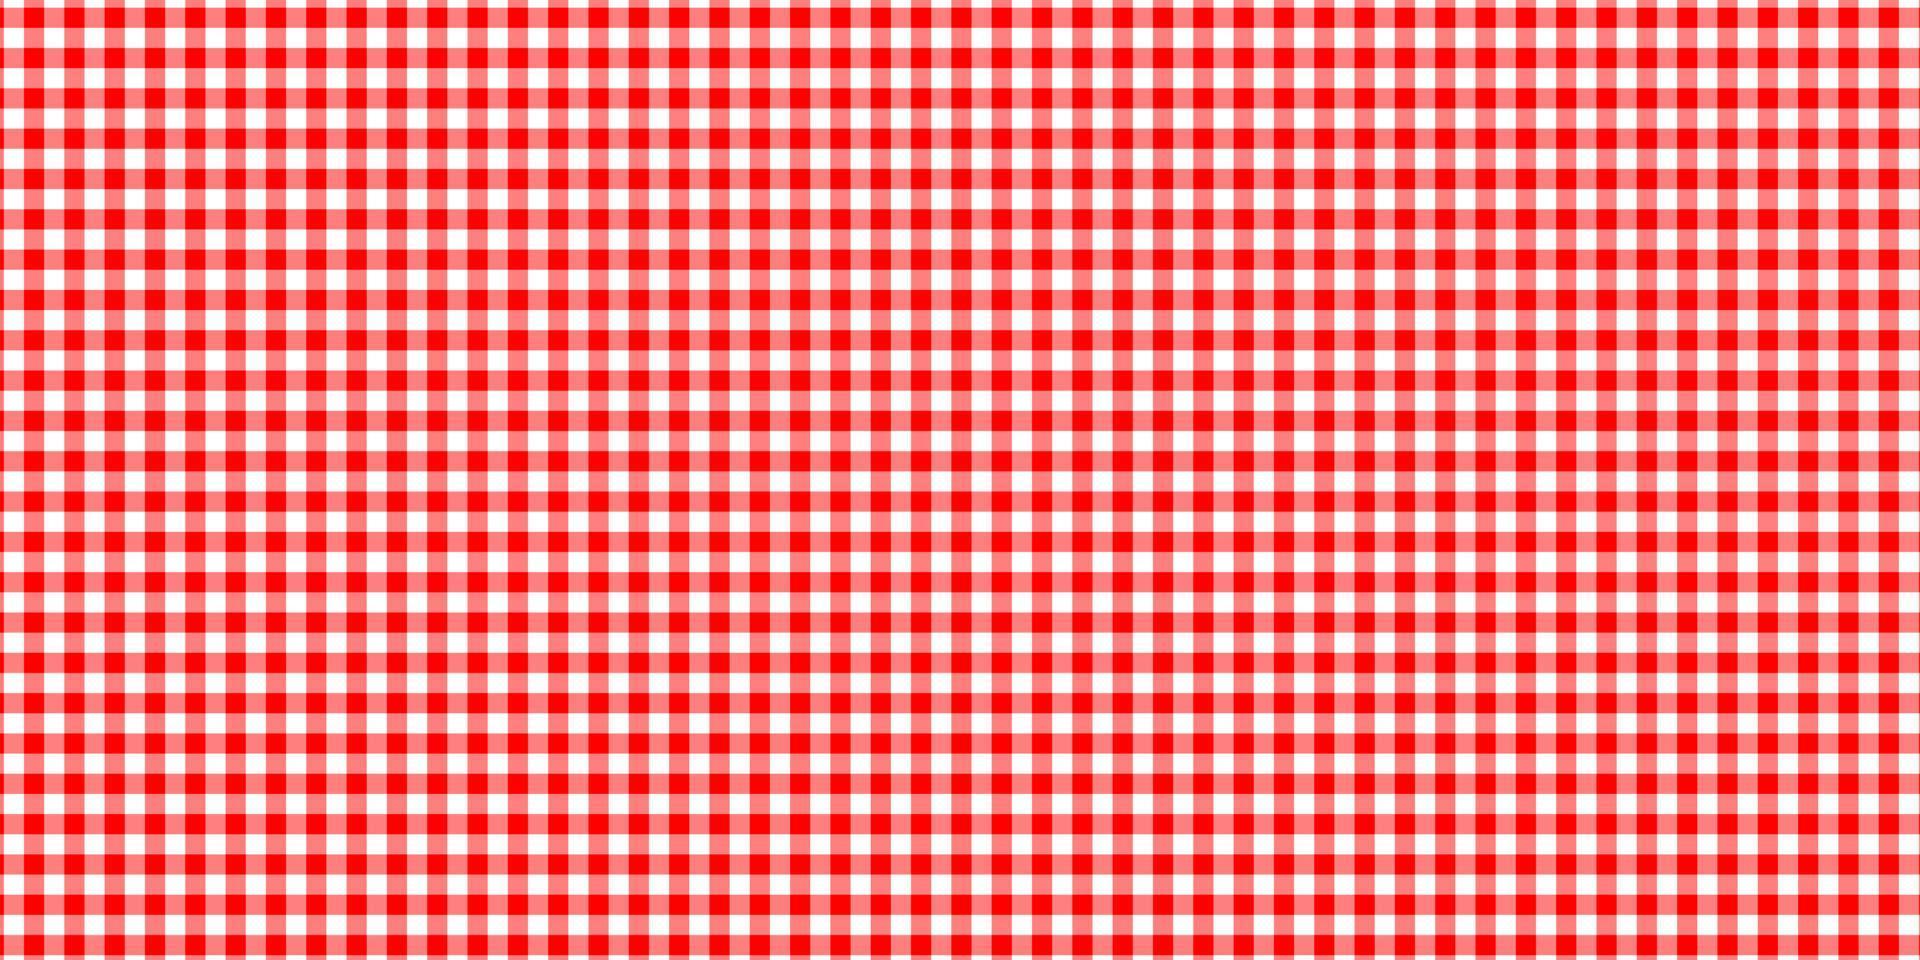 Picnic Tablecloth Seamless Pattern vector